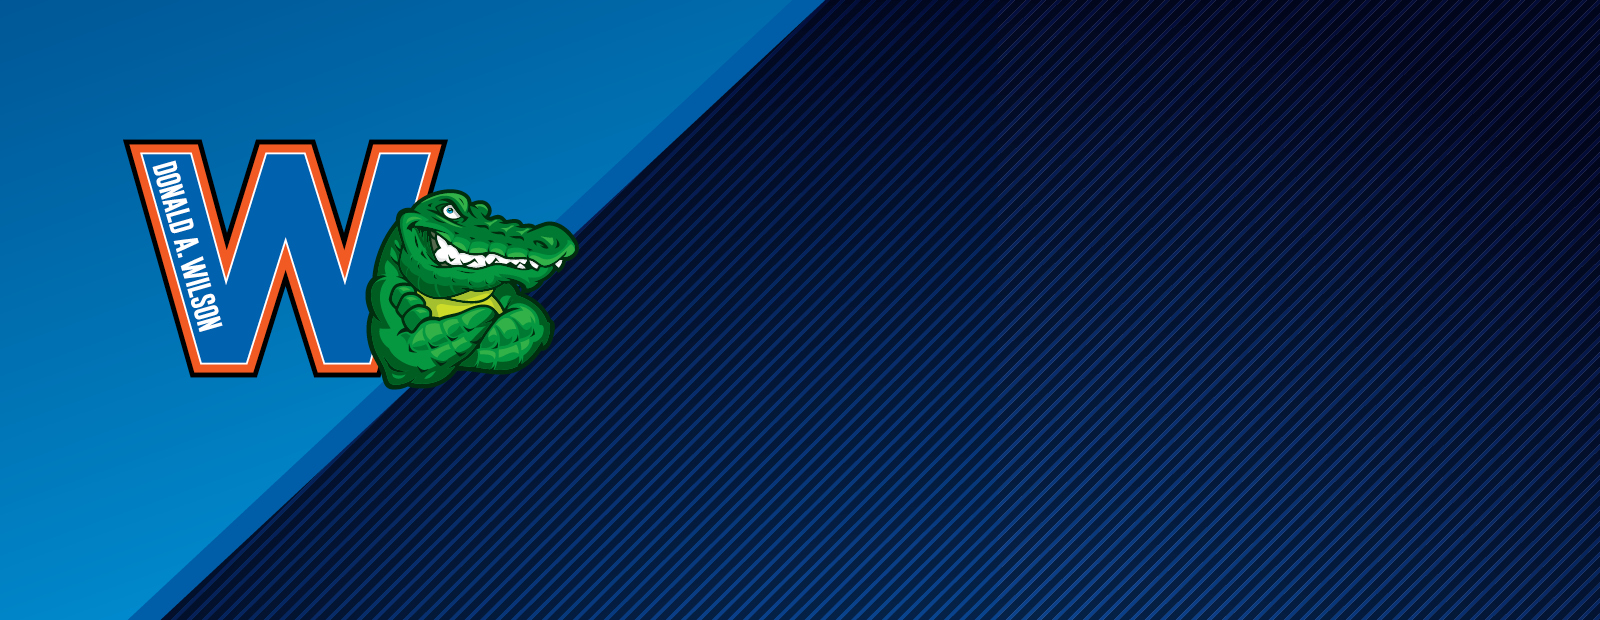 blue background with orange gator with arms crossed